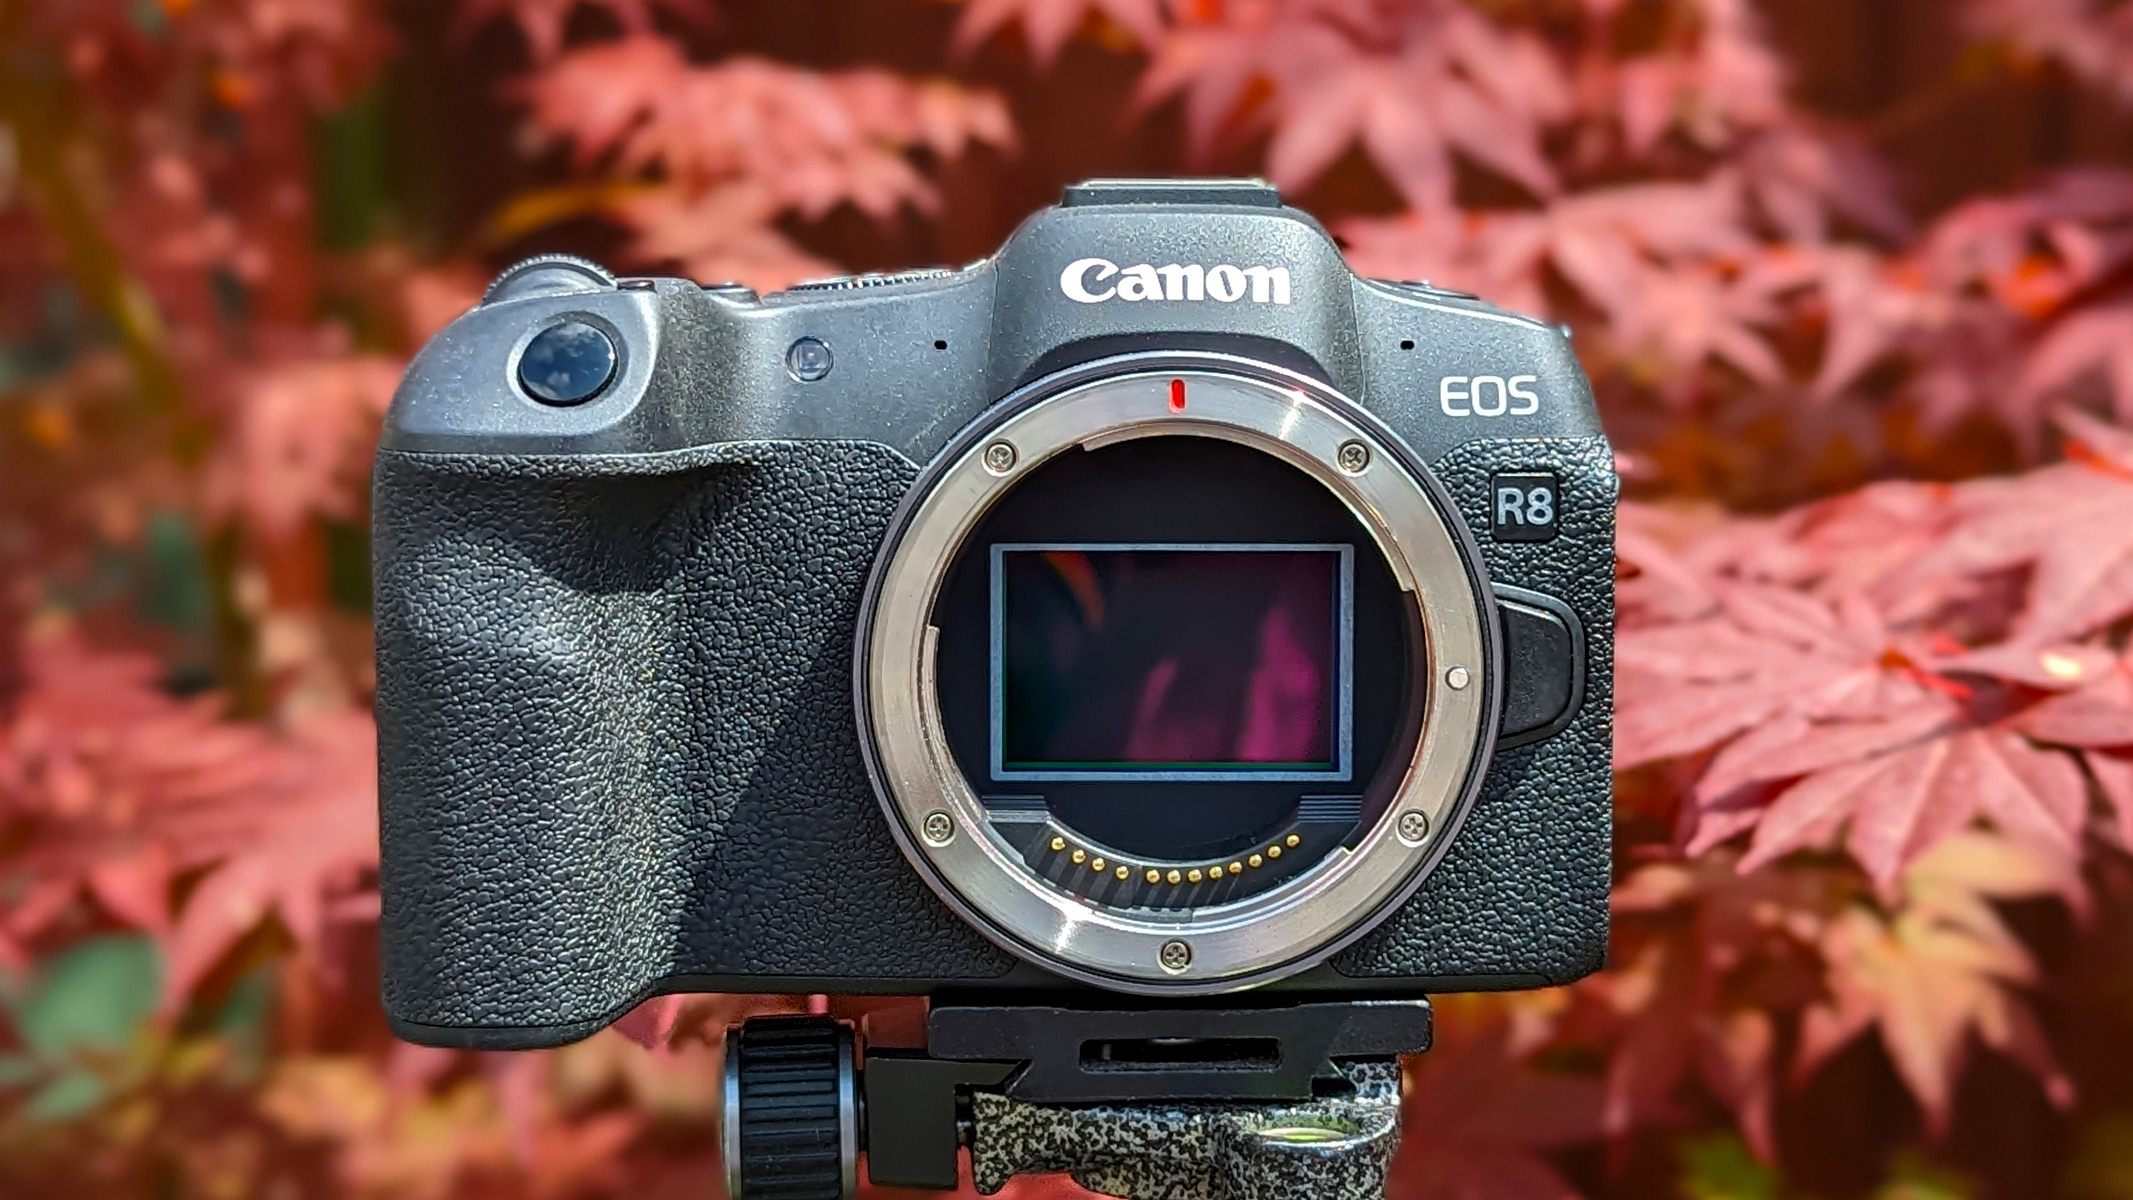 Ending soon: Snap up the Canon EOS R8 while it’s $340 off on the Prime Day Space